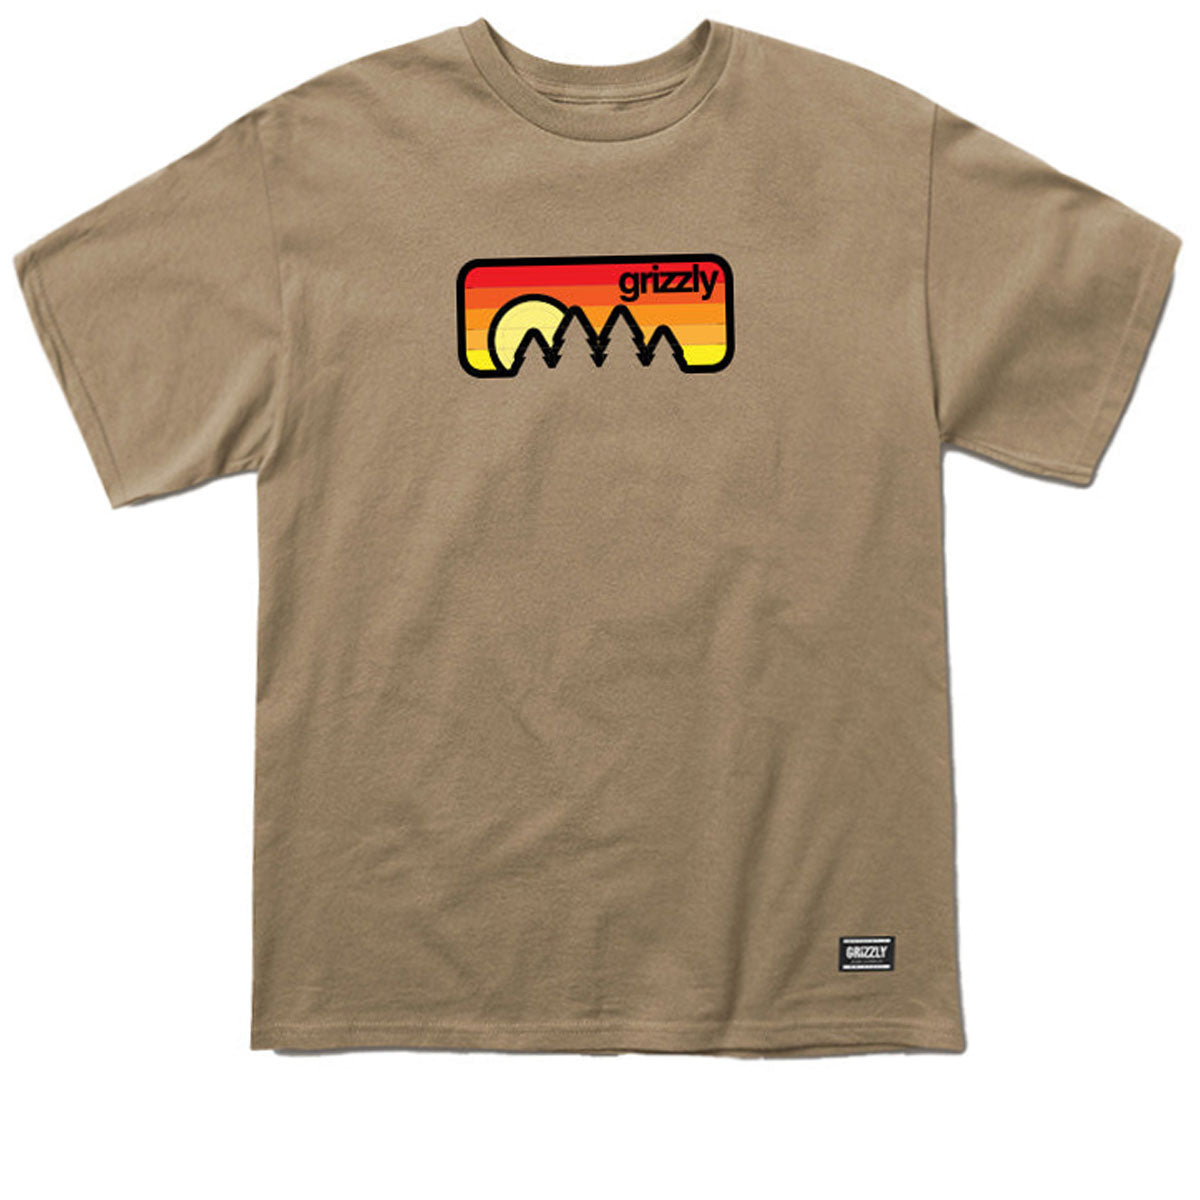 Grizzly Sunset T-Shirt - Sand image 1